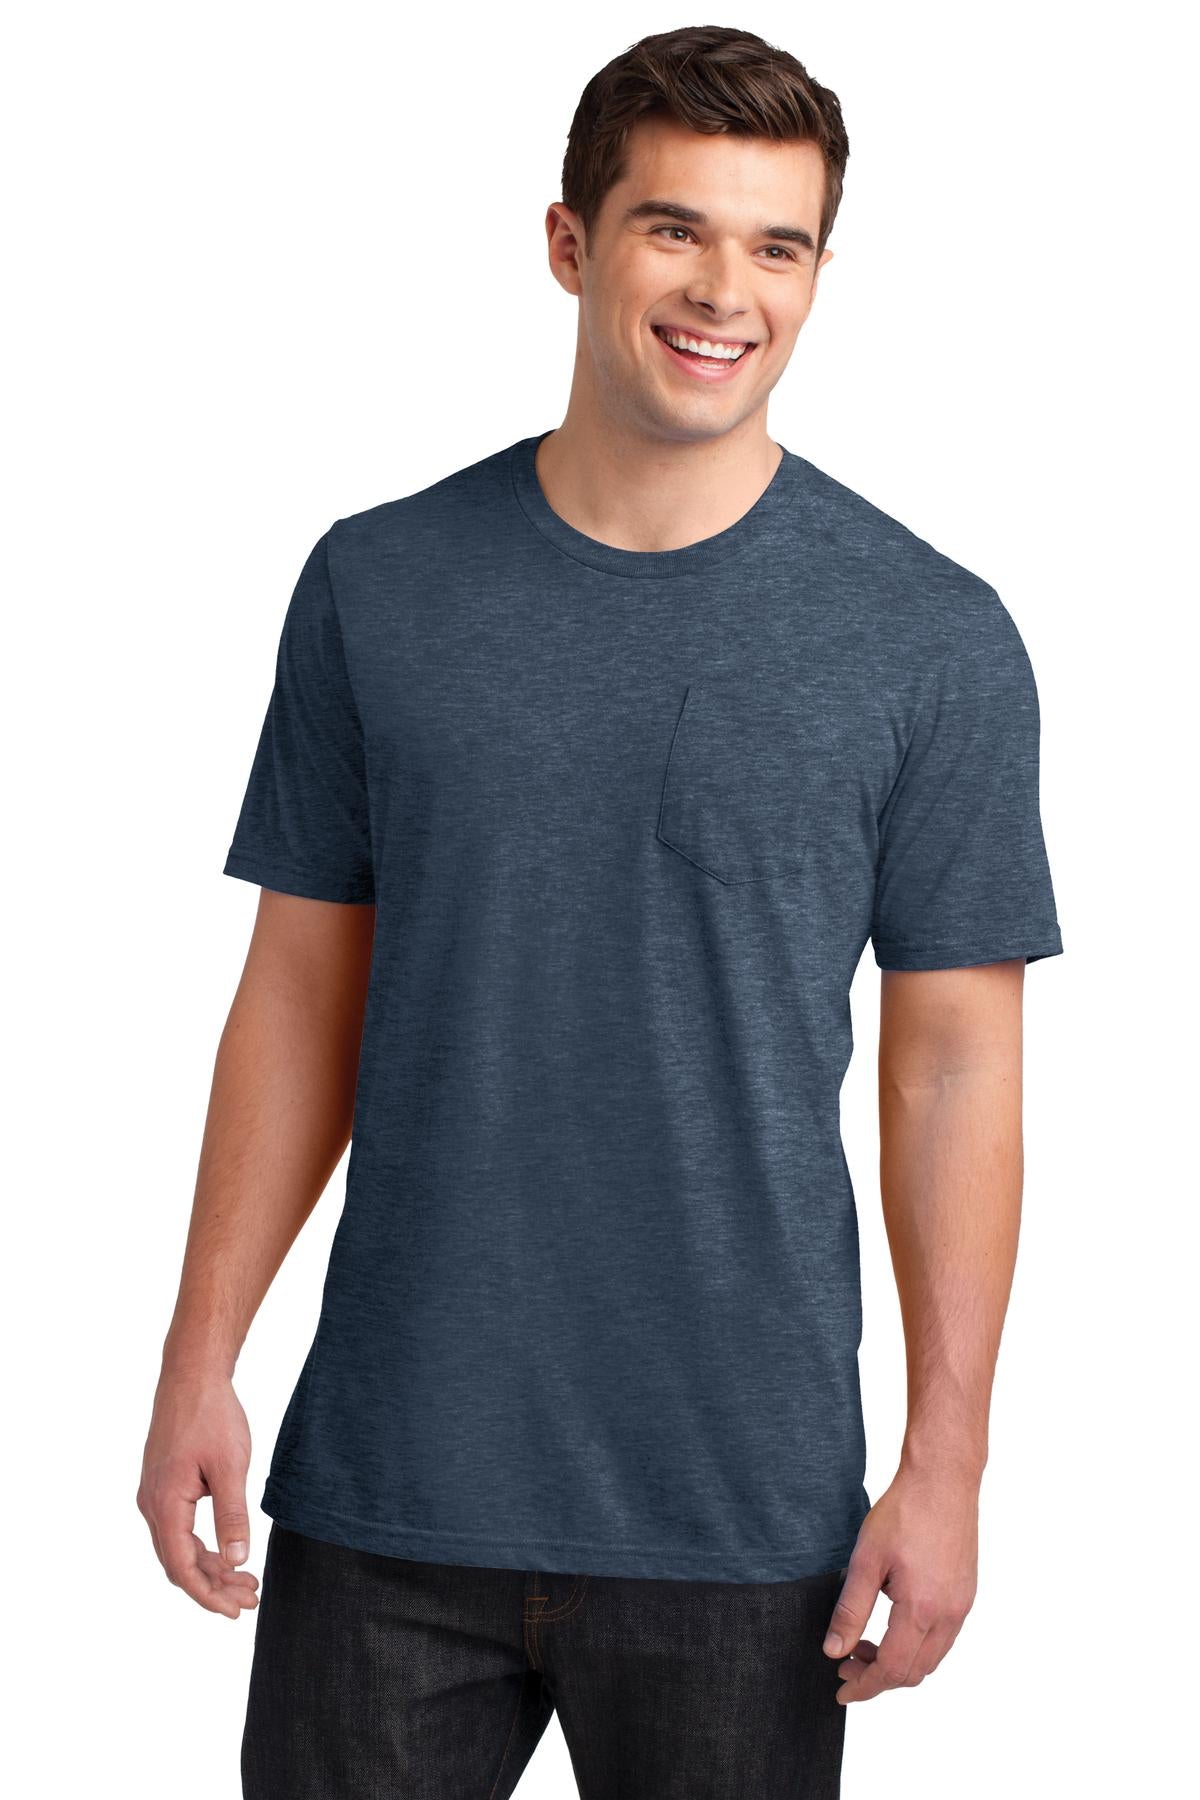 District® Very Important Tee® with Pocket. DT6000P - DFW Impression